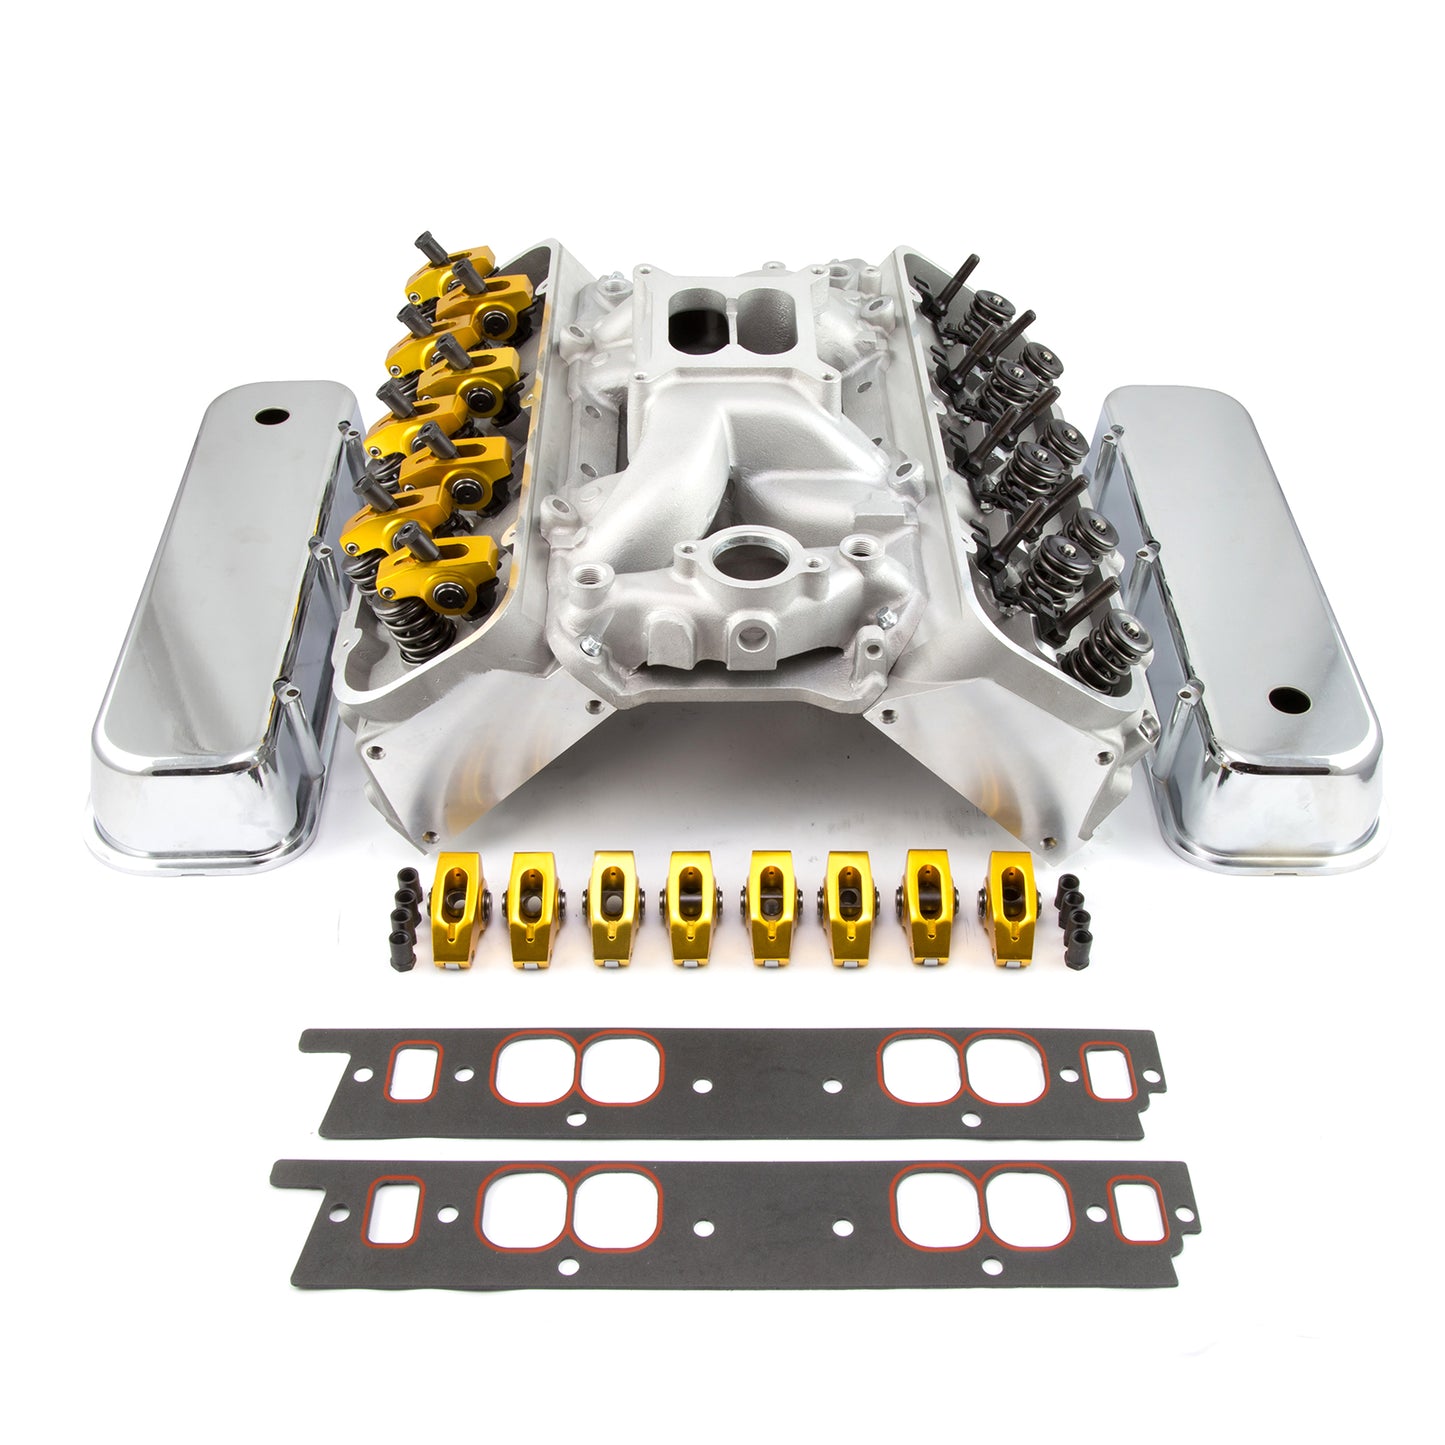 Speedmaster PCE435.1015 Fits Chevy BBC 396 Hyd Roller Cylinder Head Top End Engine Combo Kit